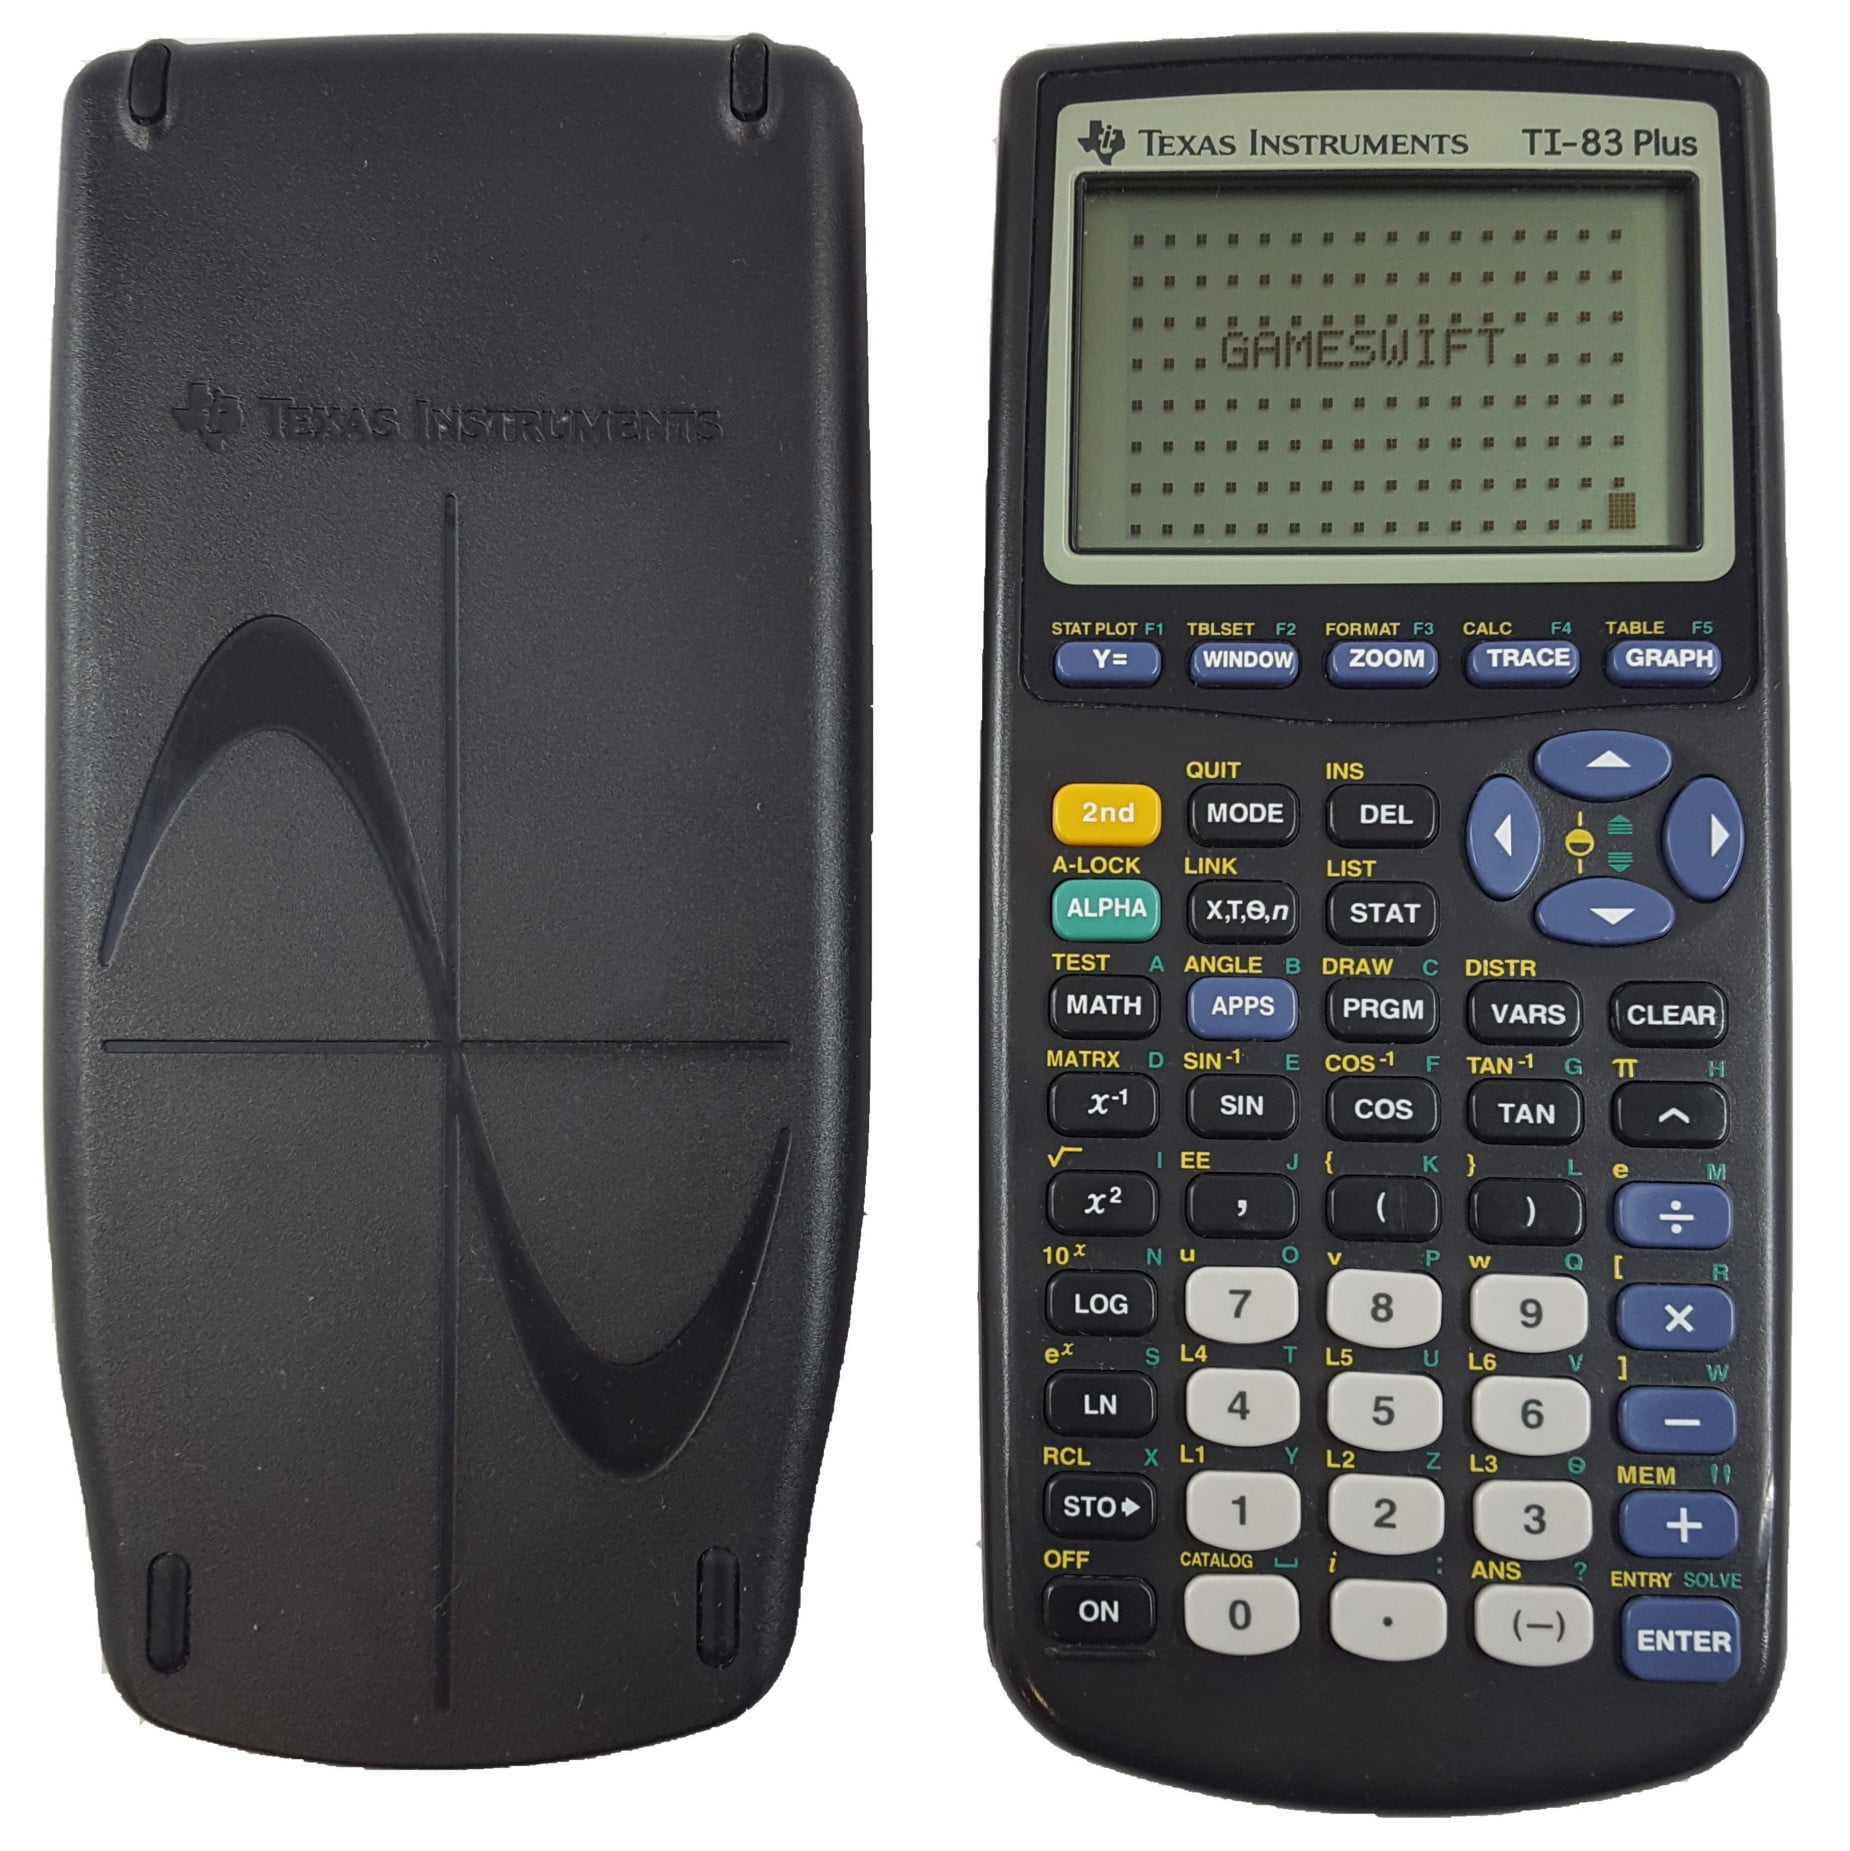 Texas Instruments(R) TI-83 Plus Graphing Calculator 